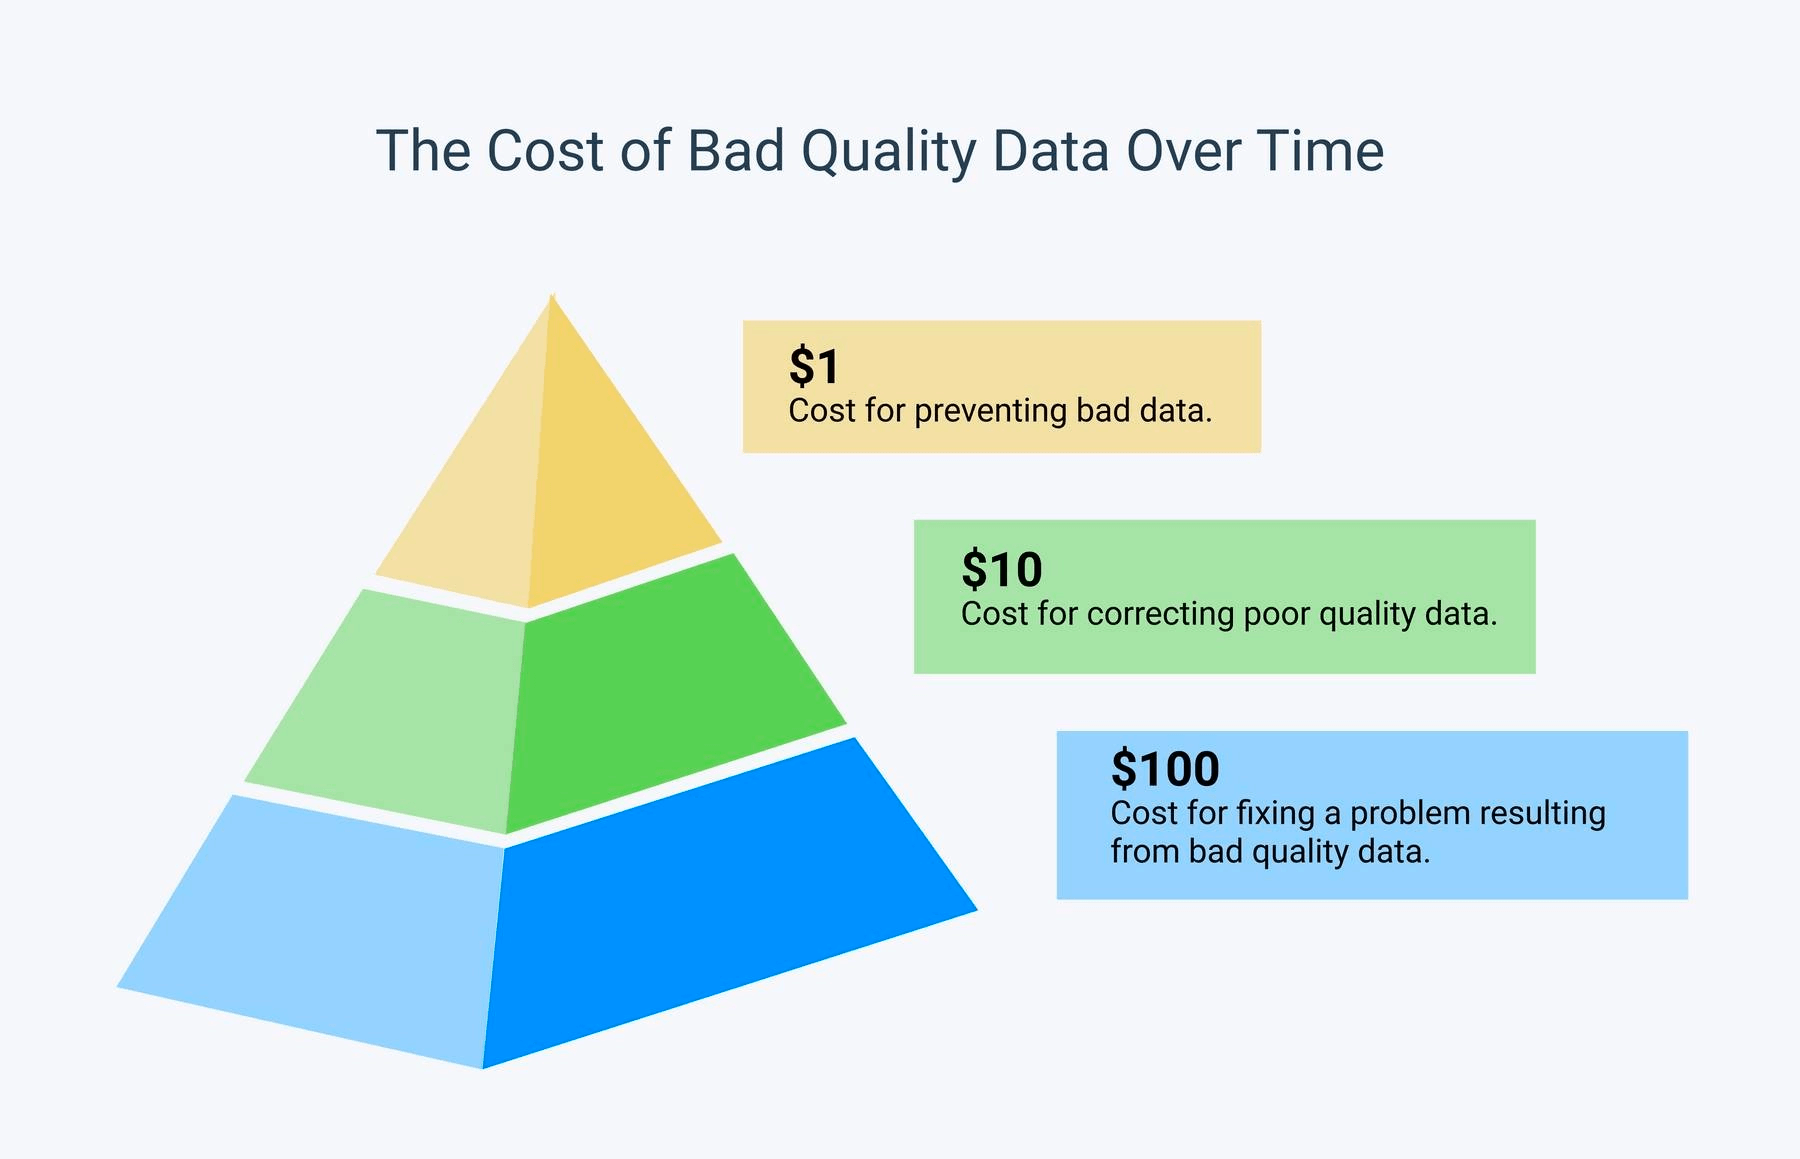 Cost of bad data: $1 for preventing it. $10 for correcting it. $100 for fixing a problem caused by bad data.